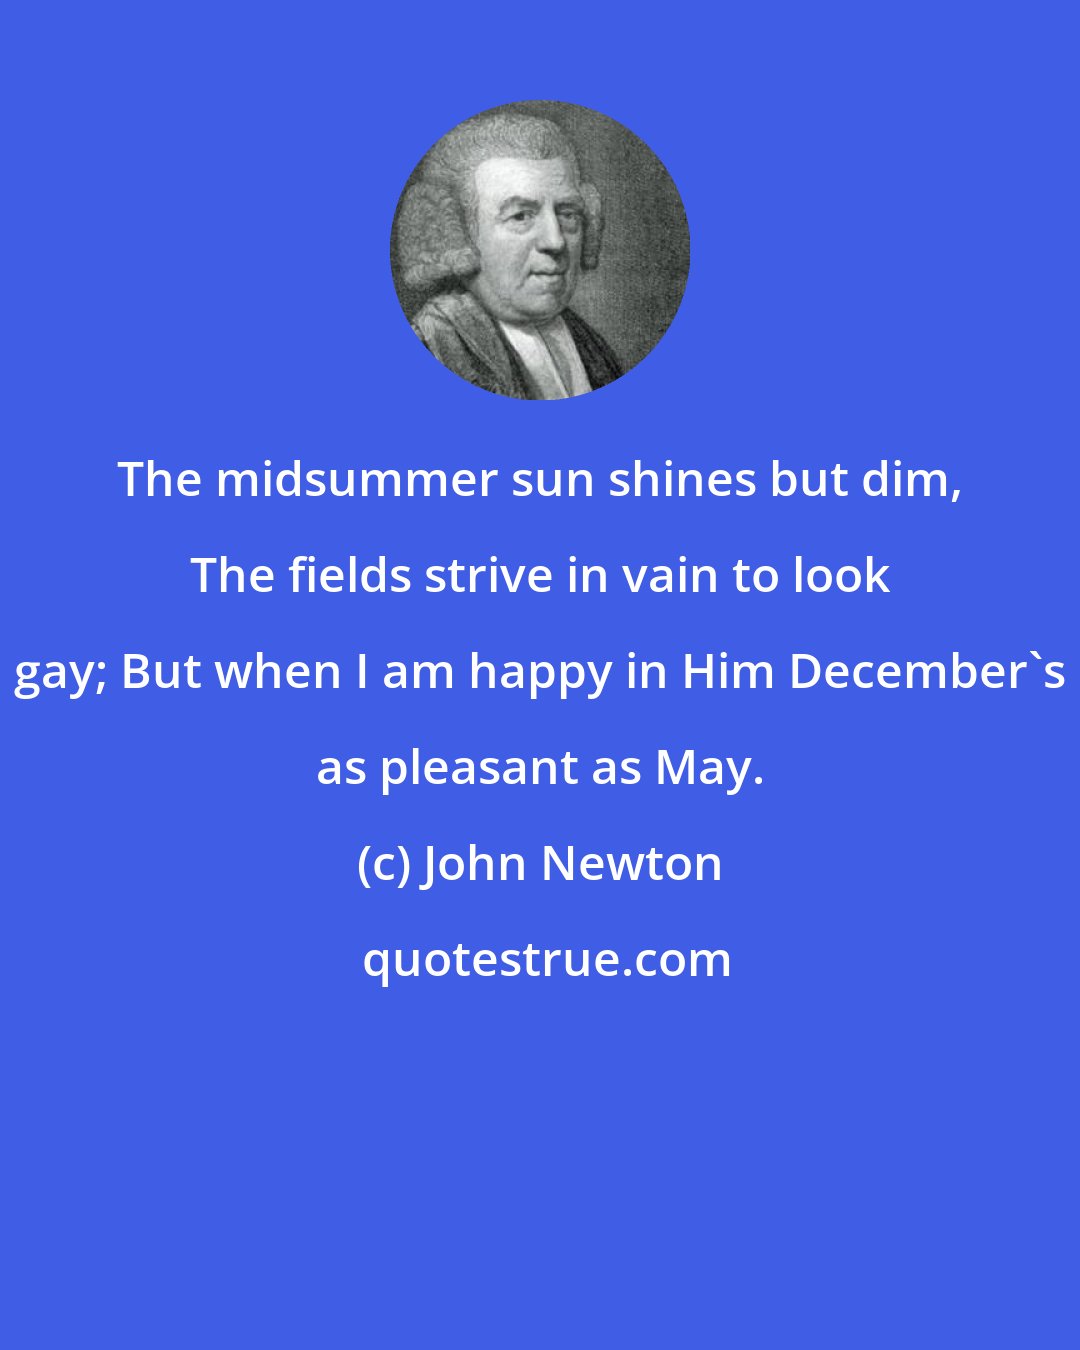 John Newton: The midsummer sun shines but dim, The fields strive in vain to look gay; But when I am happy in Him December's as pleasant as May.